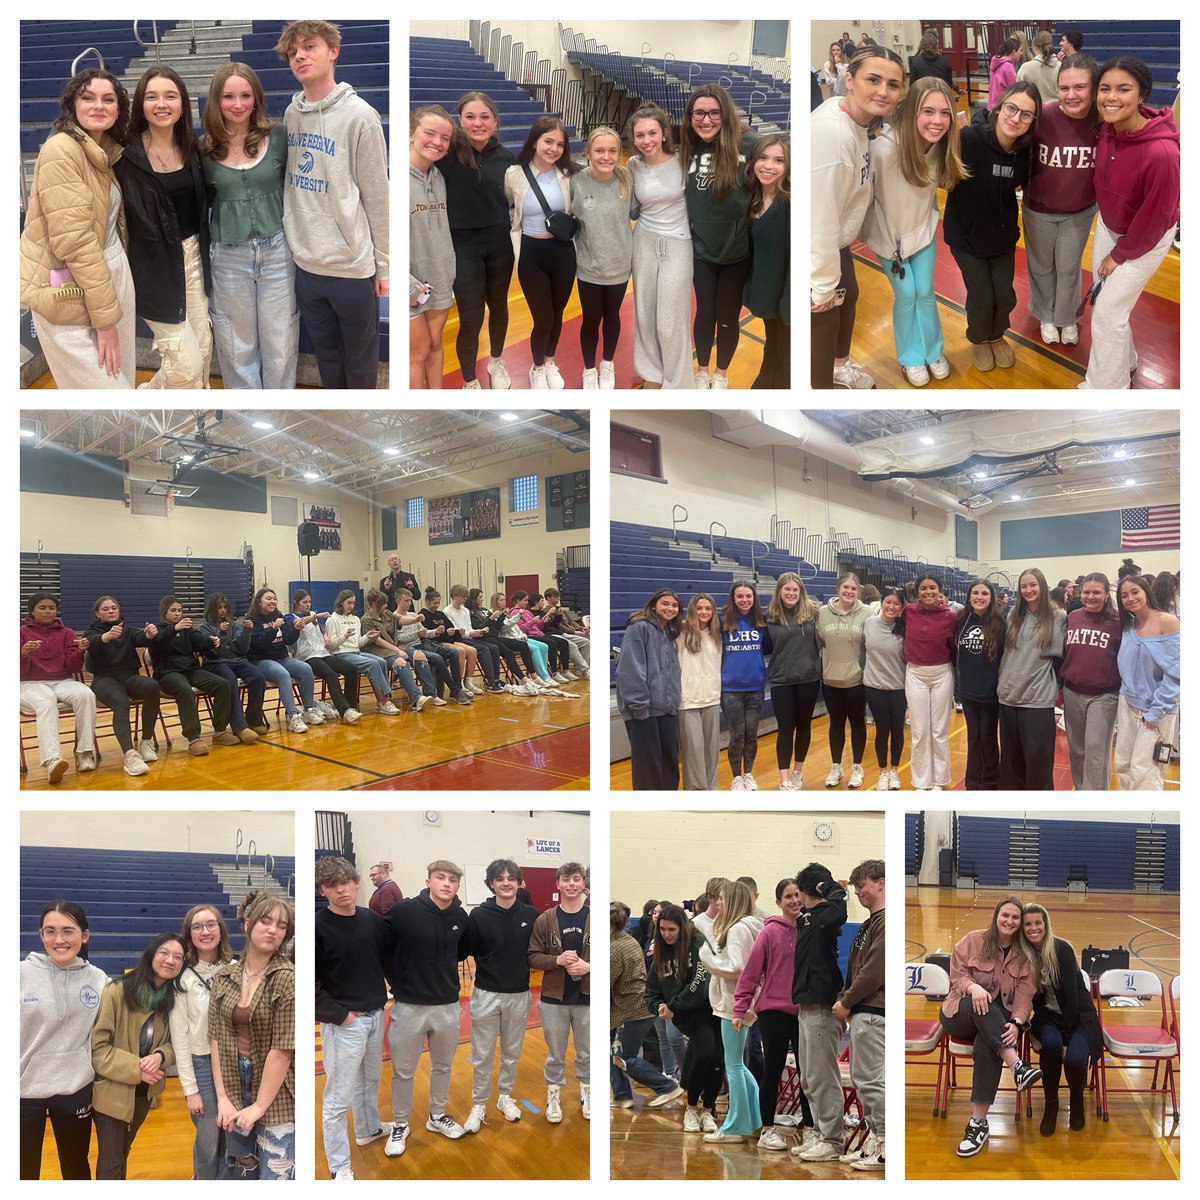 The 1st of MANY Senior Events over the next 4 months. Thank you Senior Class Advisors for hosting the annual hypnotist show.